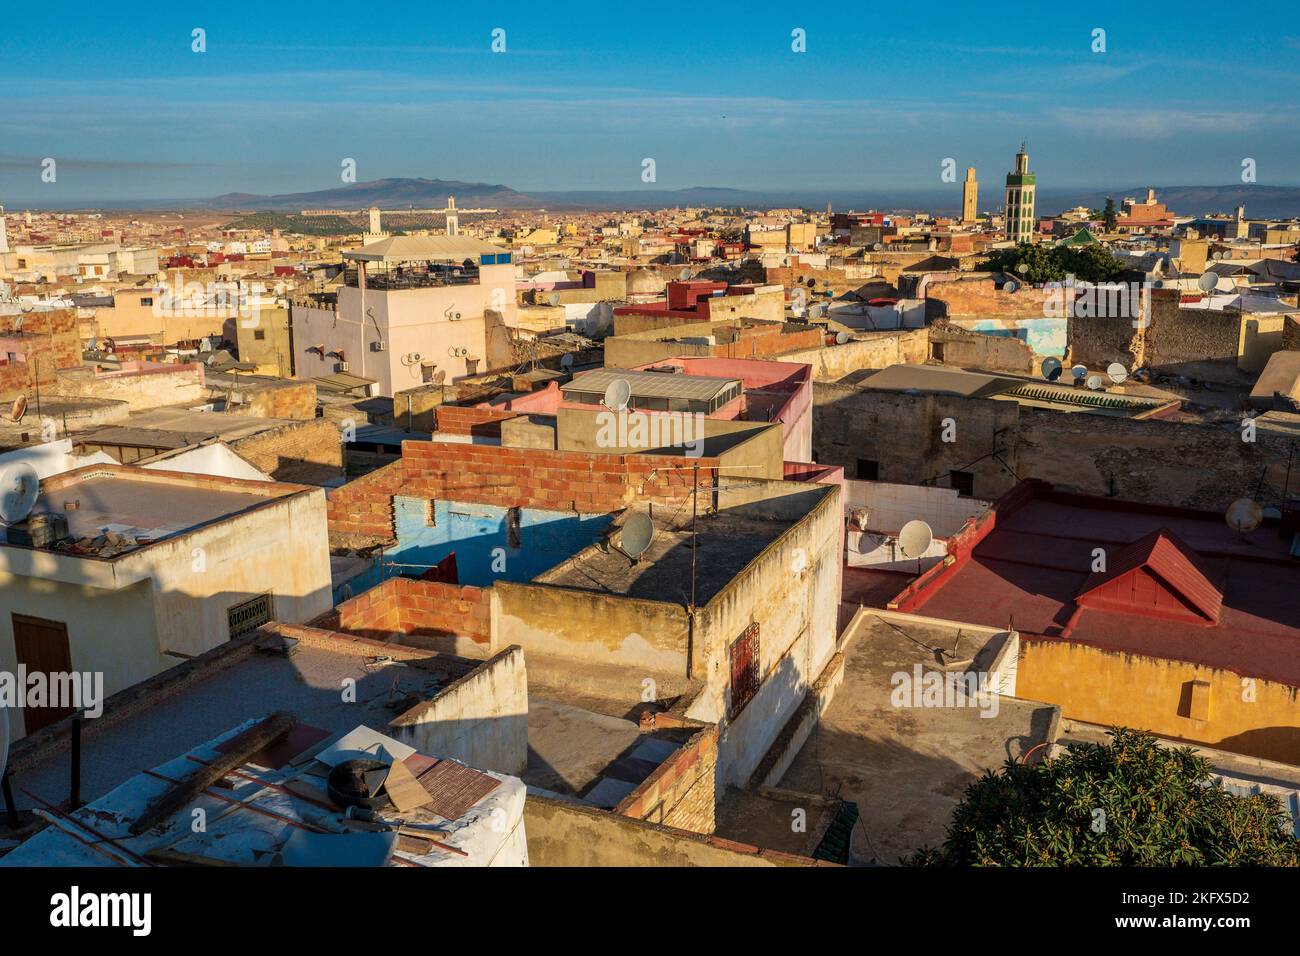 City skyline with mosques and houses of Meknes, Morocco Stock Photo